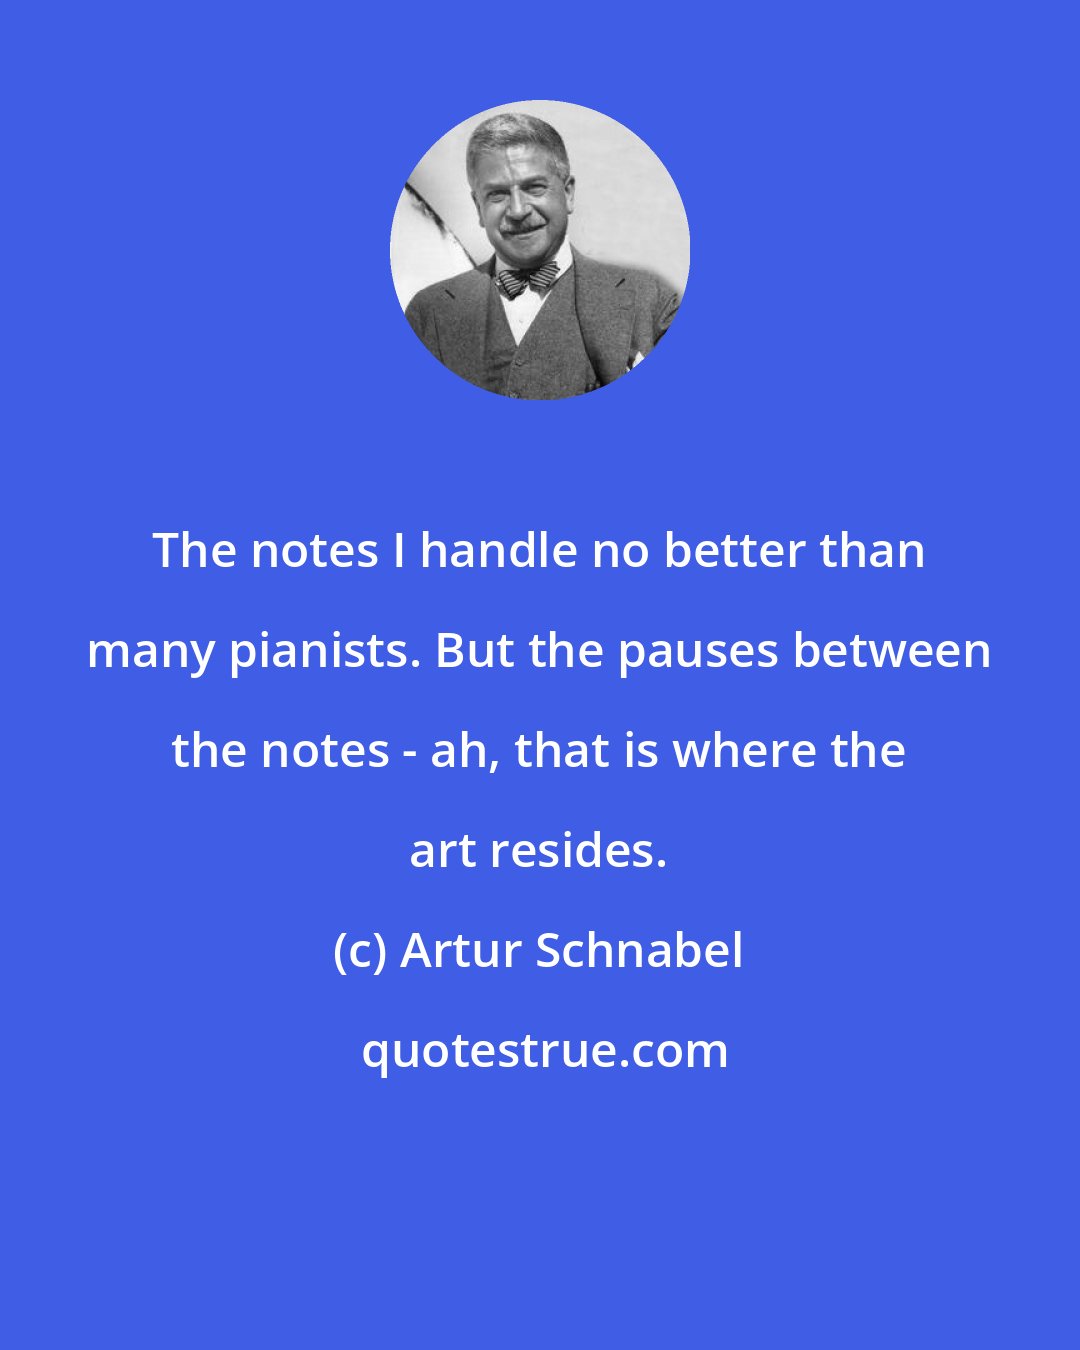 Artur Schnabel: The notes I handle no better than many pianists. But the pauses between the notes - ah, that is where the art resides.